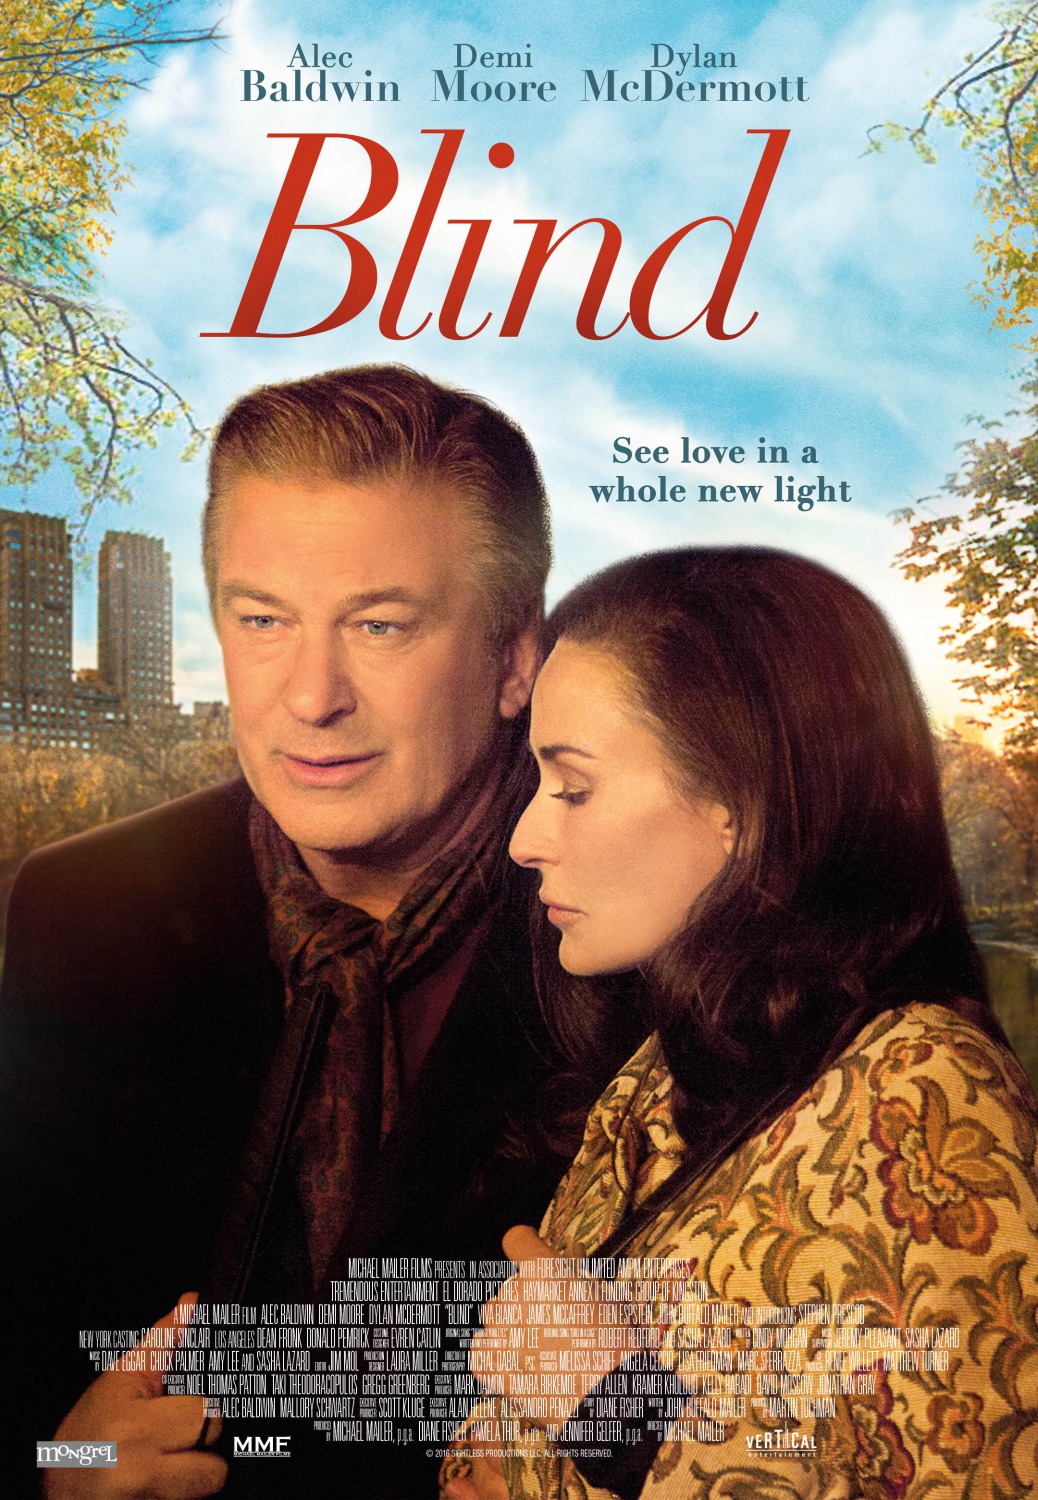 Trailer, Clips, Images and Posters for BLIND Starring Alec Baldwin and